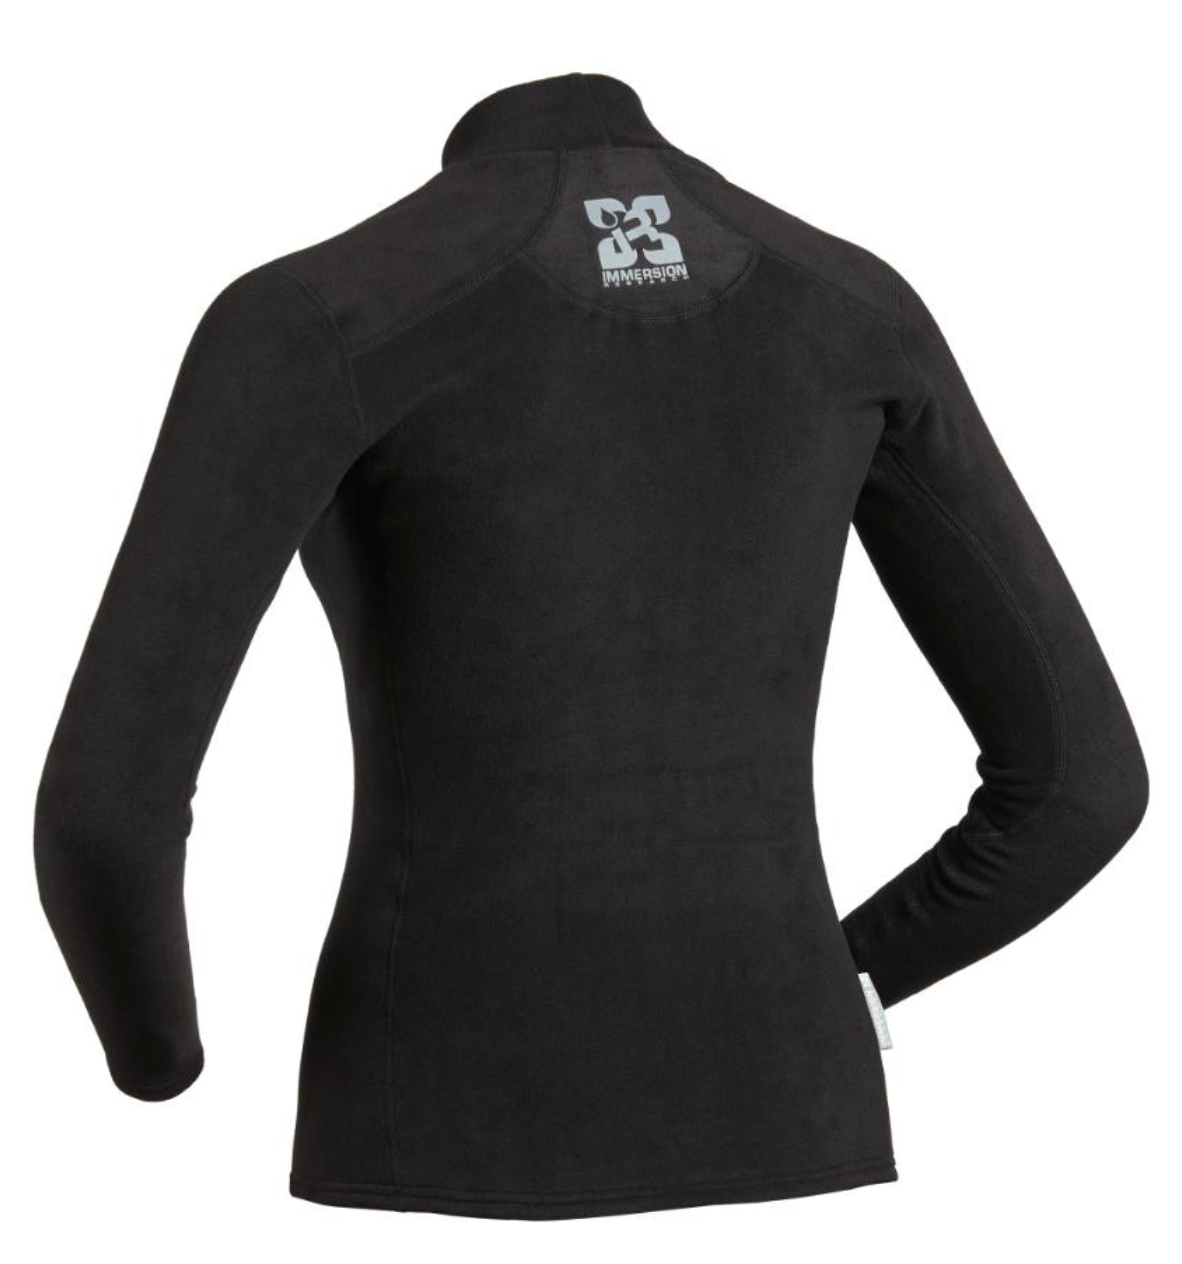 Immersion Research Women's Long Sleeve Thick Skin